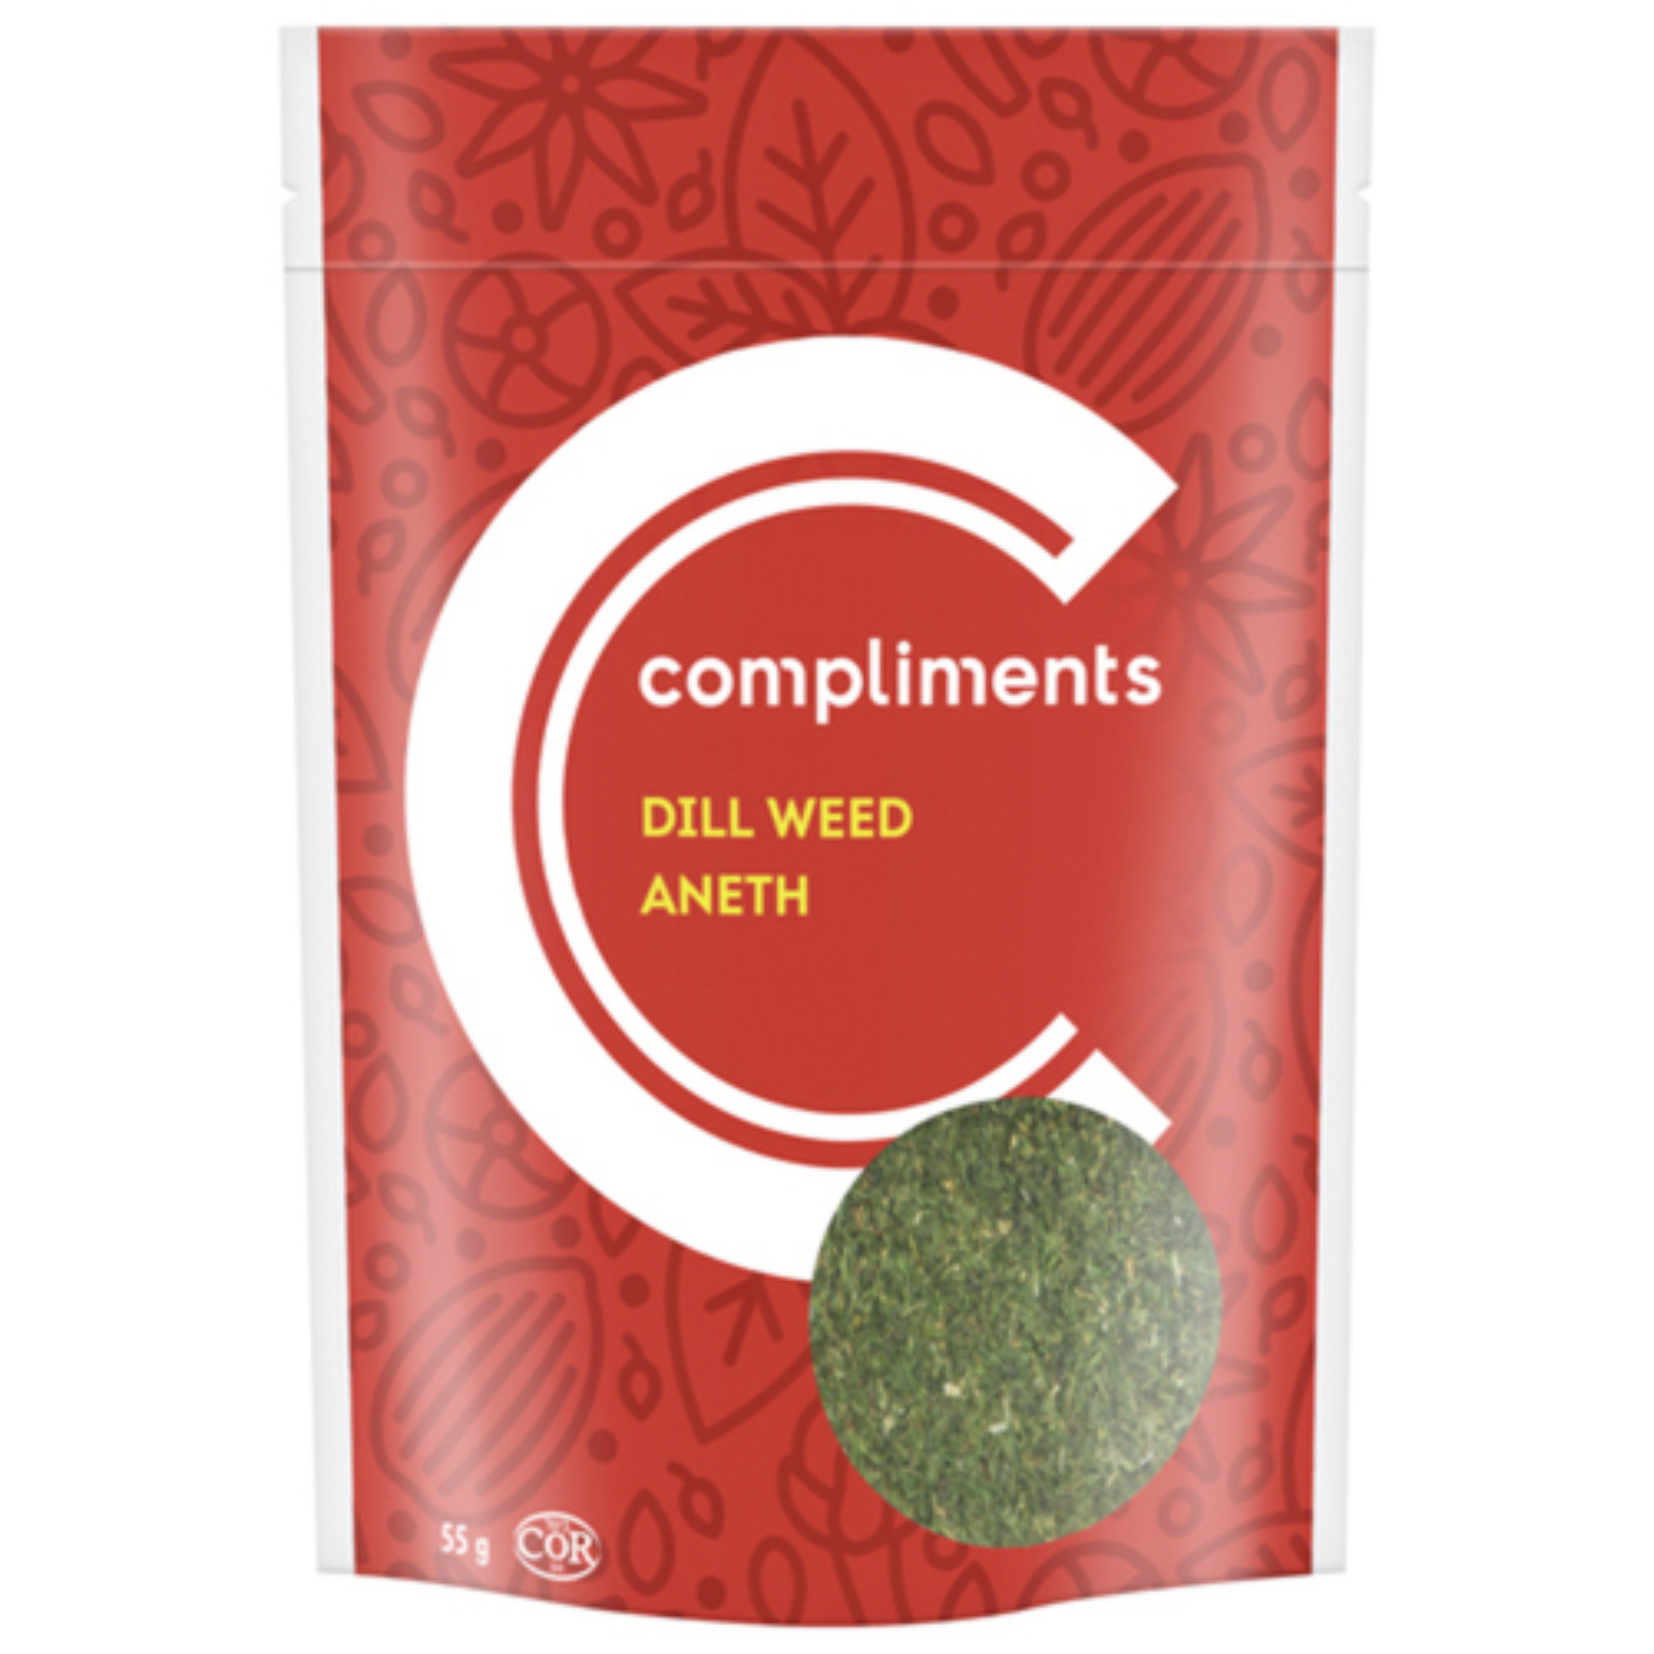 Compliments Dill Weed 55g